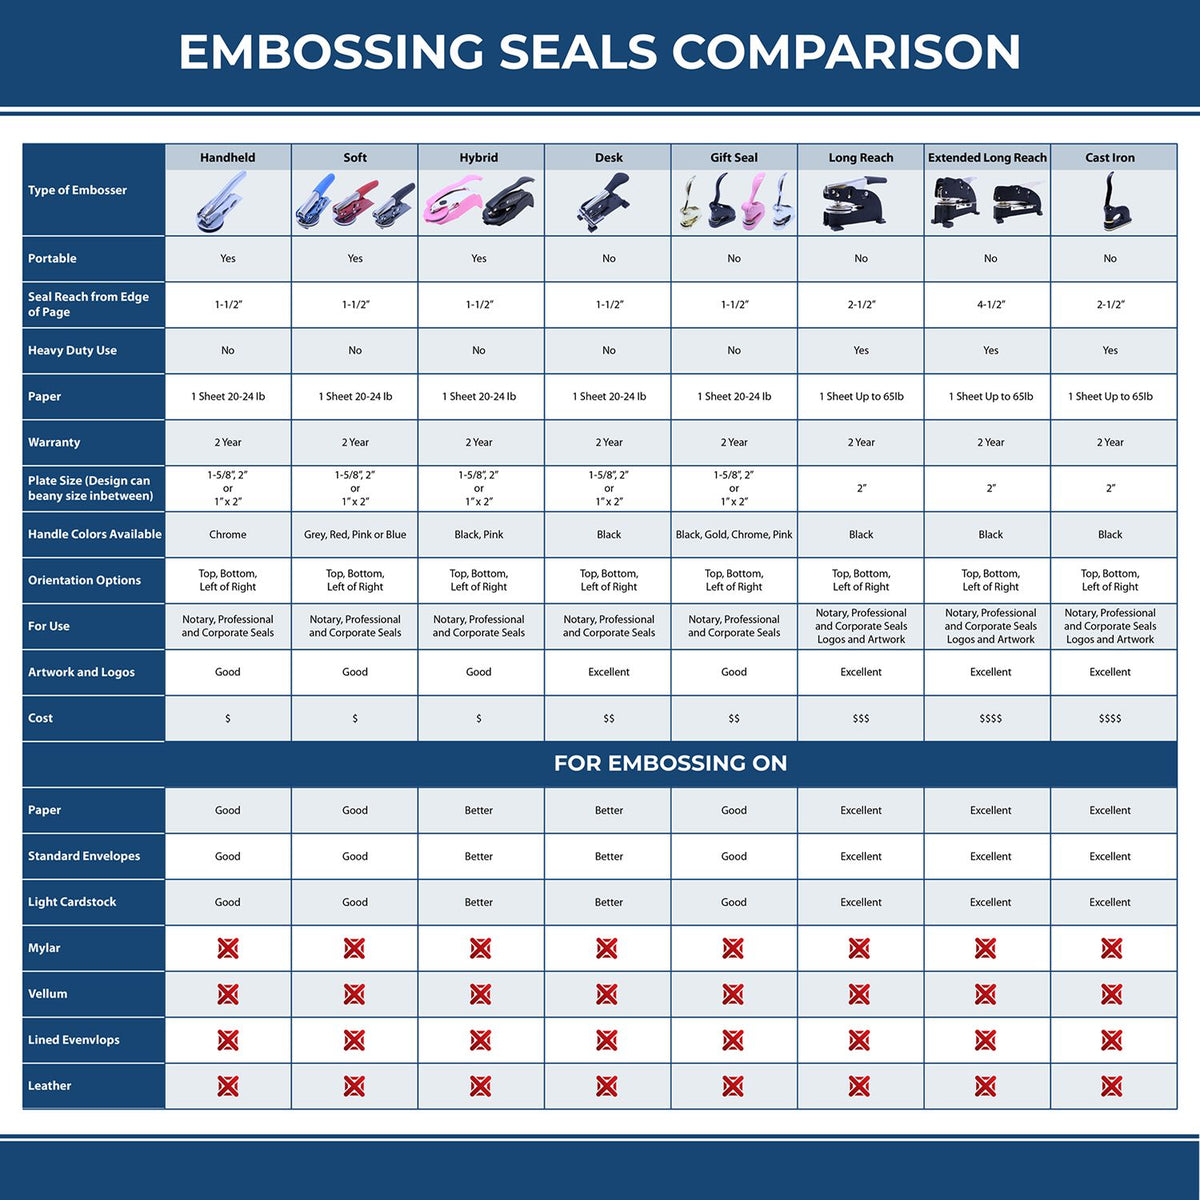 A comparison chart for the different types of mount models available for the Hybrid Tennessee Land Surveyor Seal